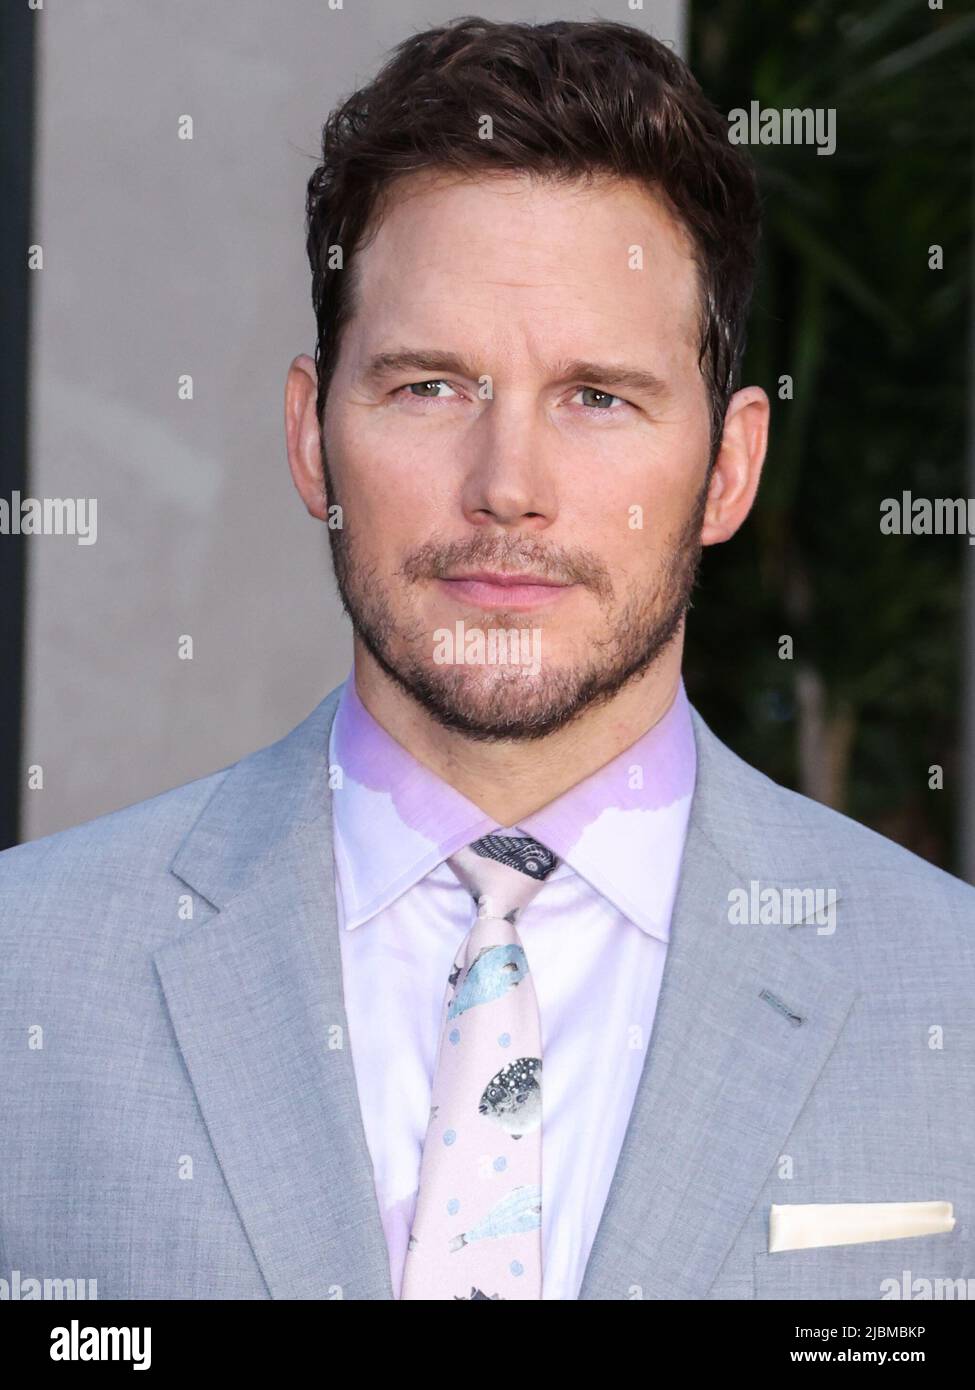 HOLLYWOOD, LOS ANGELES, CALIFORNIA, USA - JUNE 06: American actor Chris Pratt arrives at the Los Angeles Premiere Of Universal Pictures' 'Jurassic World Dominion' held at the TCL Chinese Theatre IMAX on June 6, 2022 in Hollywood, Los Angeles, California, United States. (Photo by Xavier Collin/Image Press Agency) Stock Photo